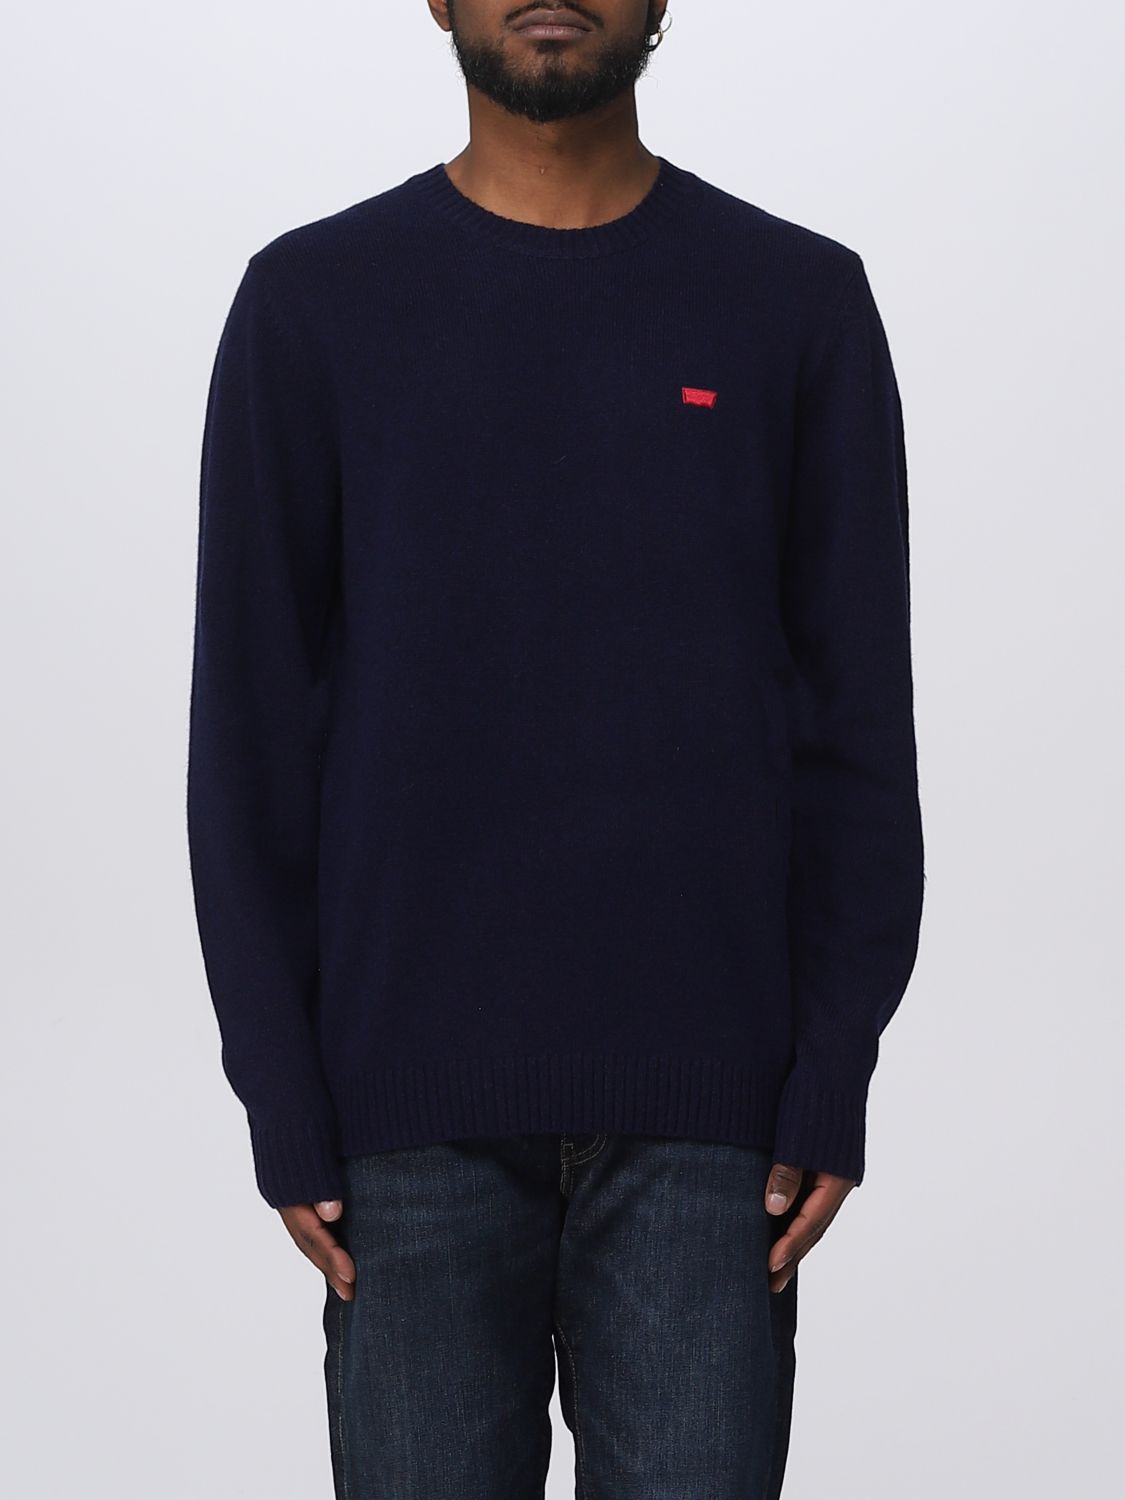 LEVI'S: sweater for man - Blue | Levi's sweater A43200001 online on ...